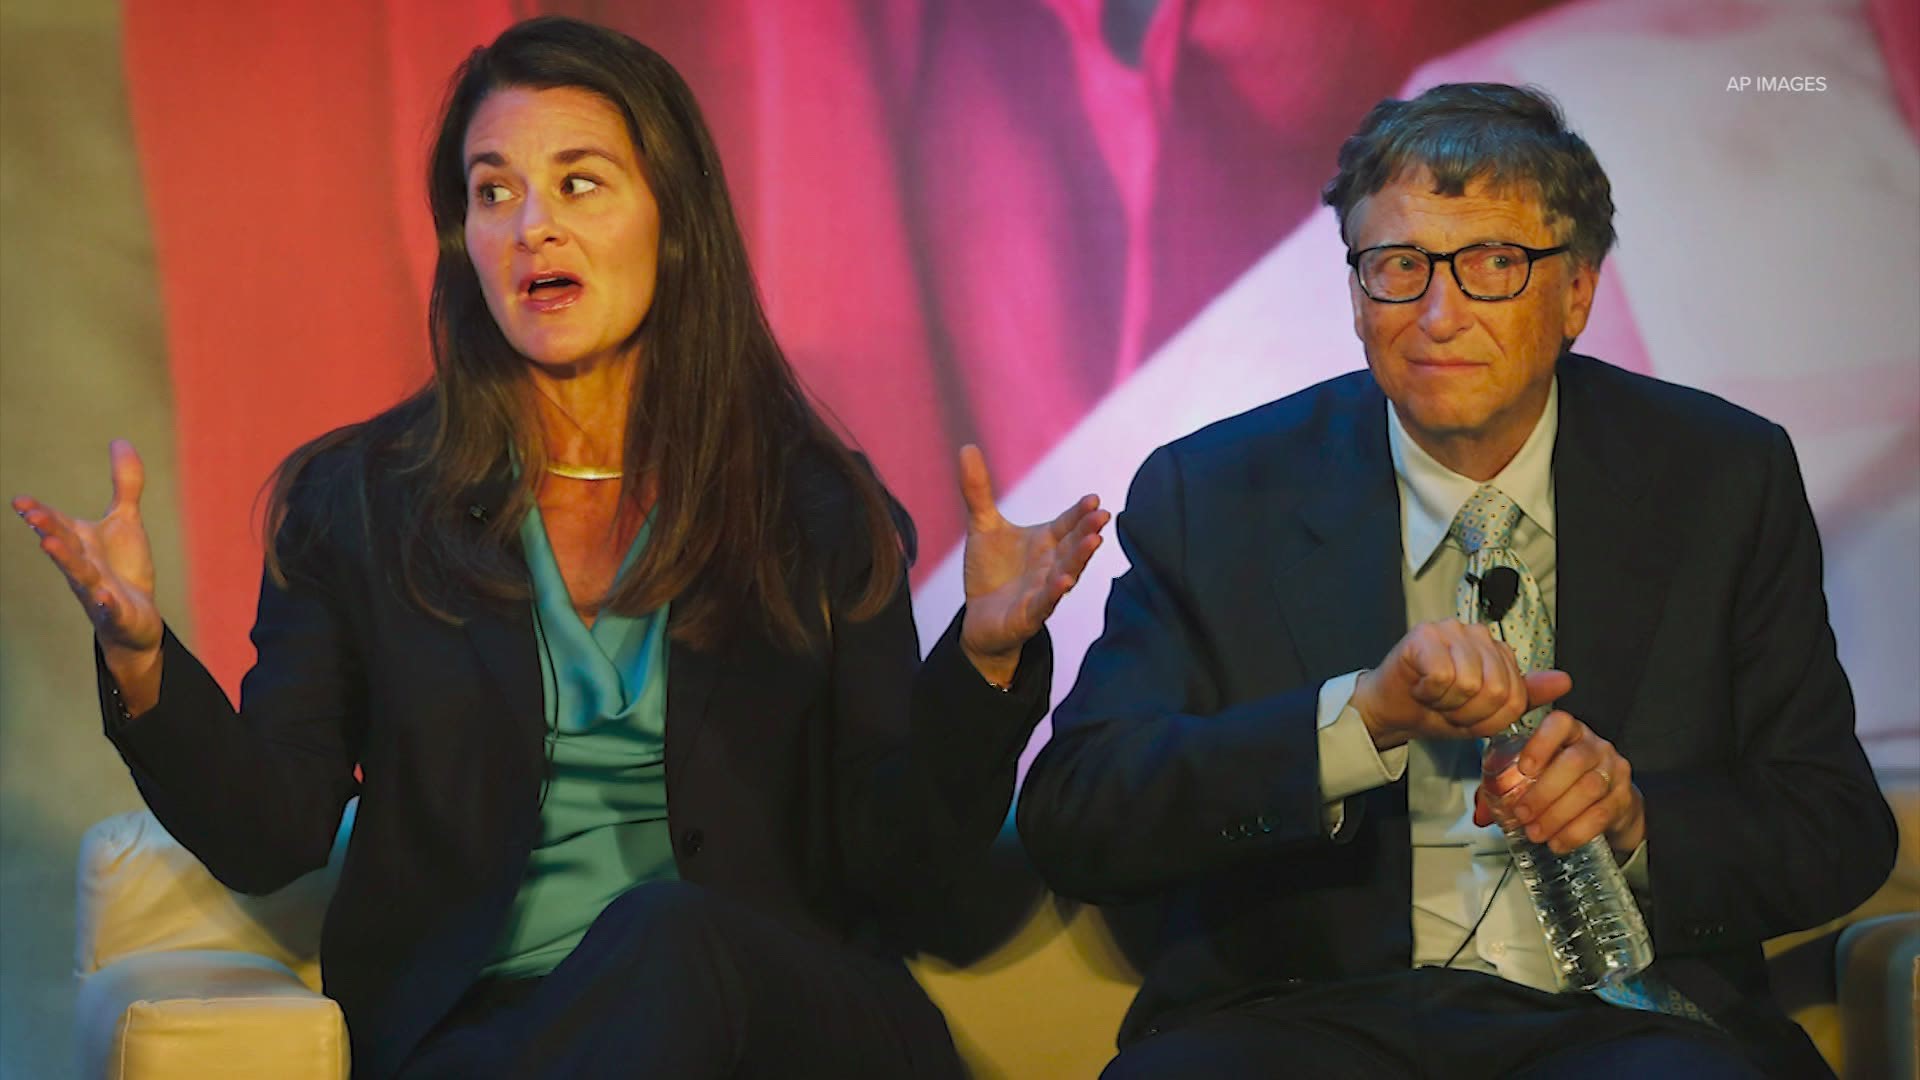 Bill and Melinda Gates announced they're getting a divorce after 27 years of marriage and three children.